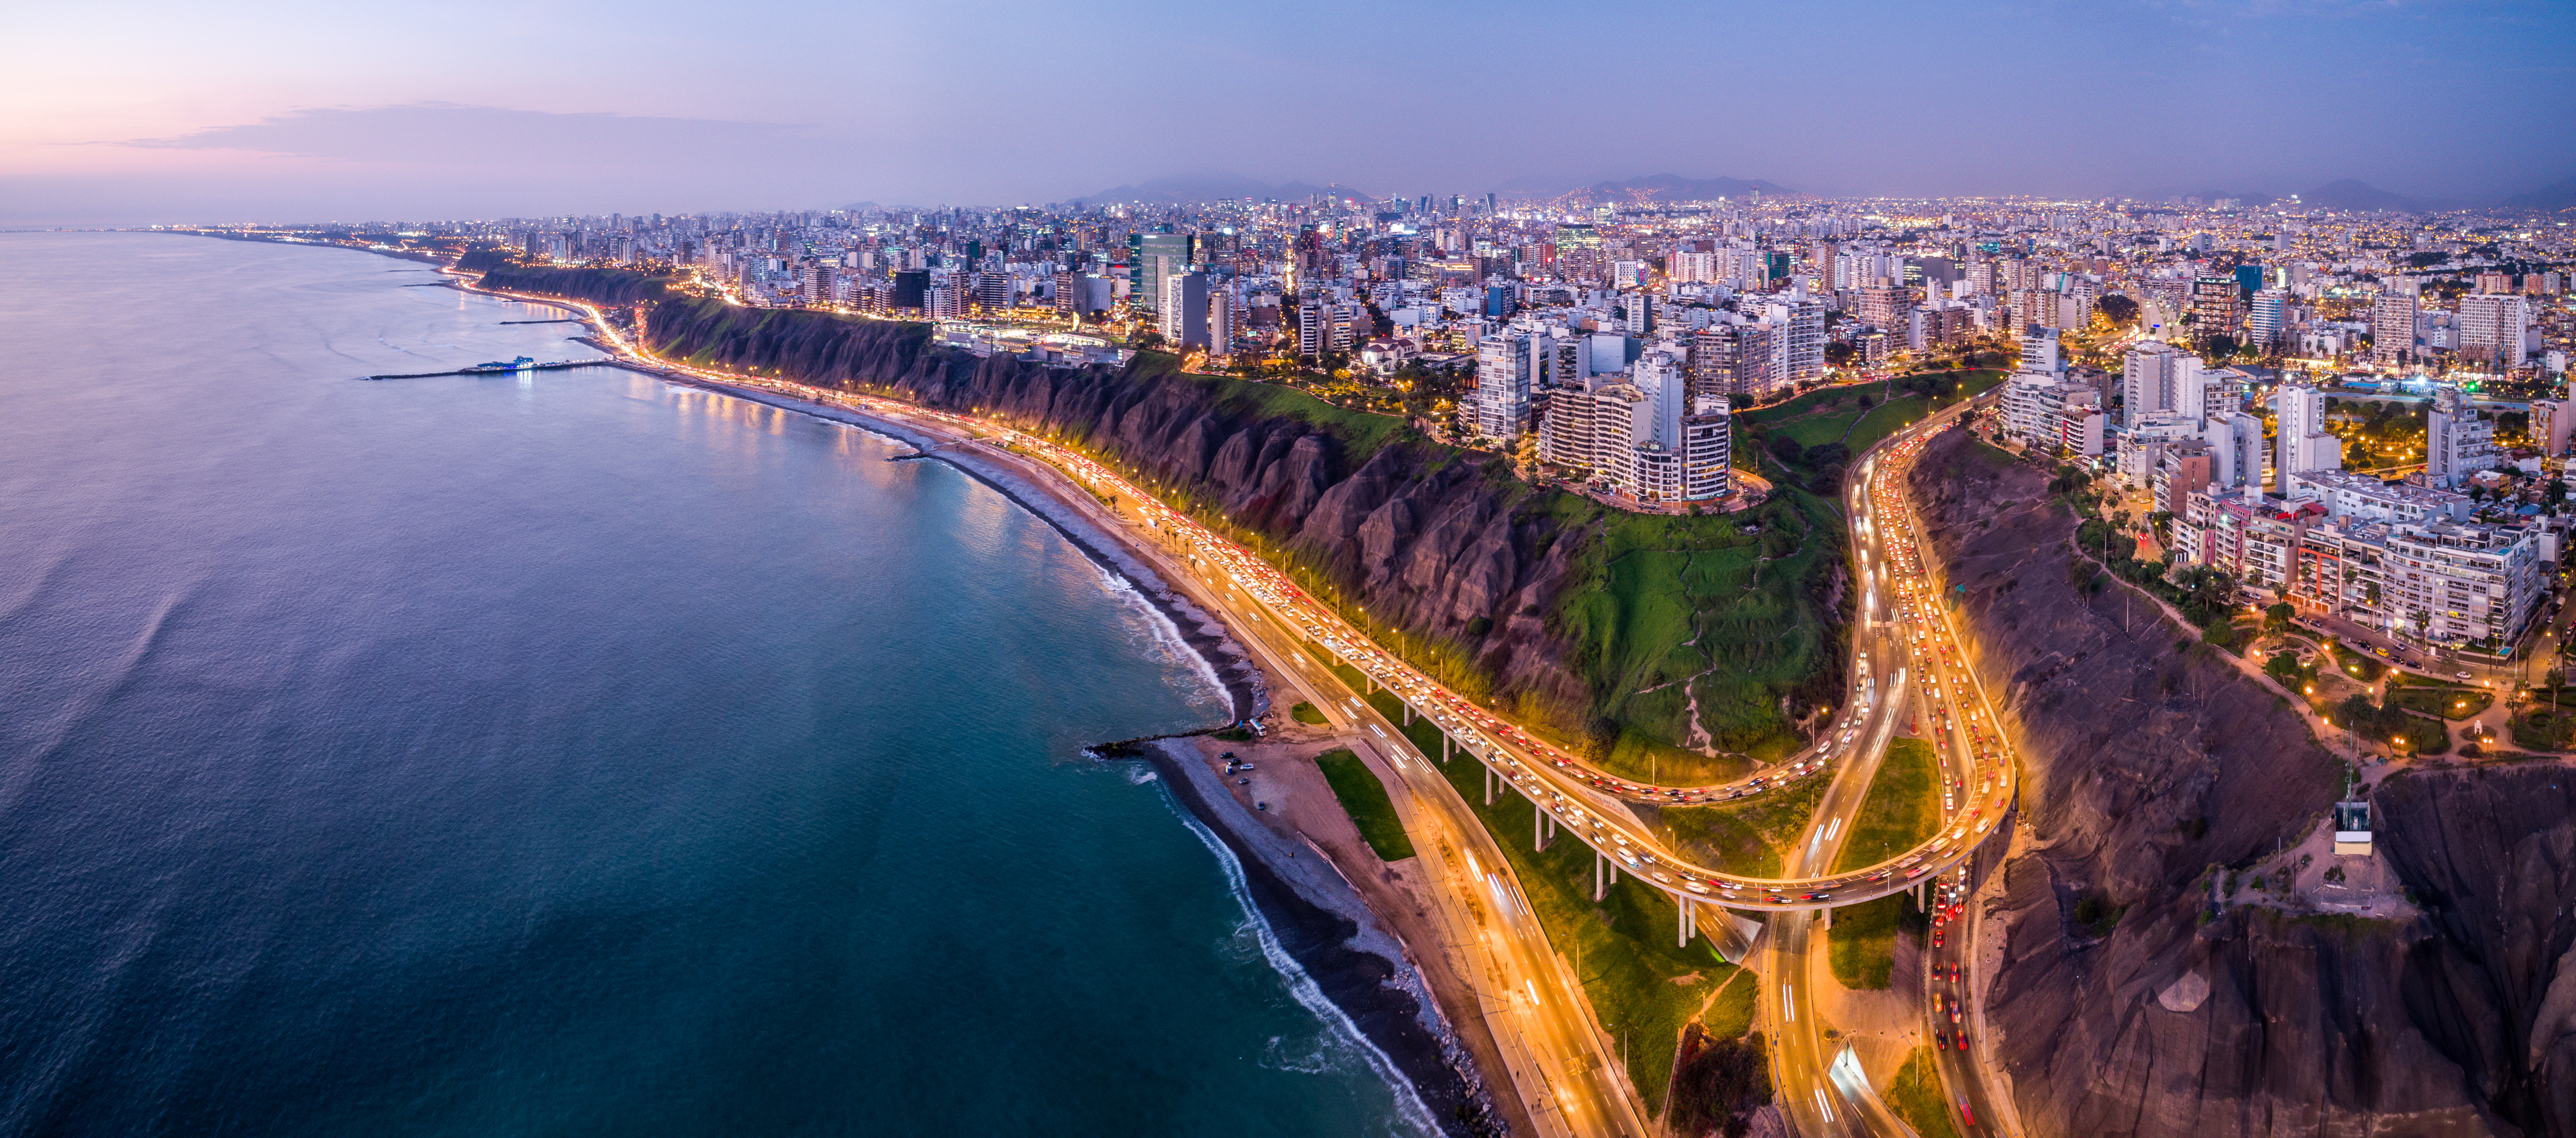 Slide 8 of 41: Aerial view of Lima city from Miraflores at blue time